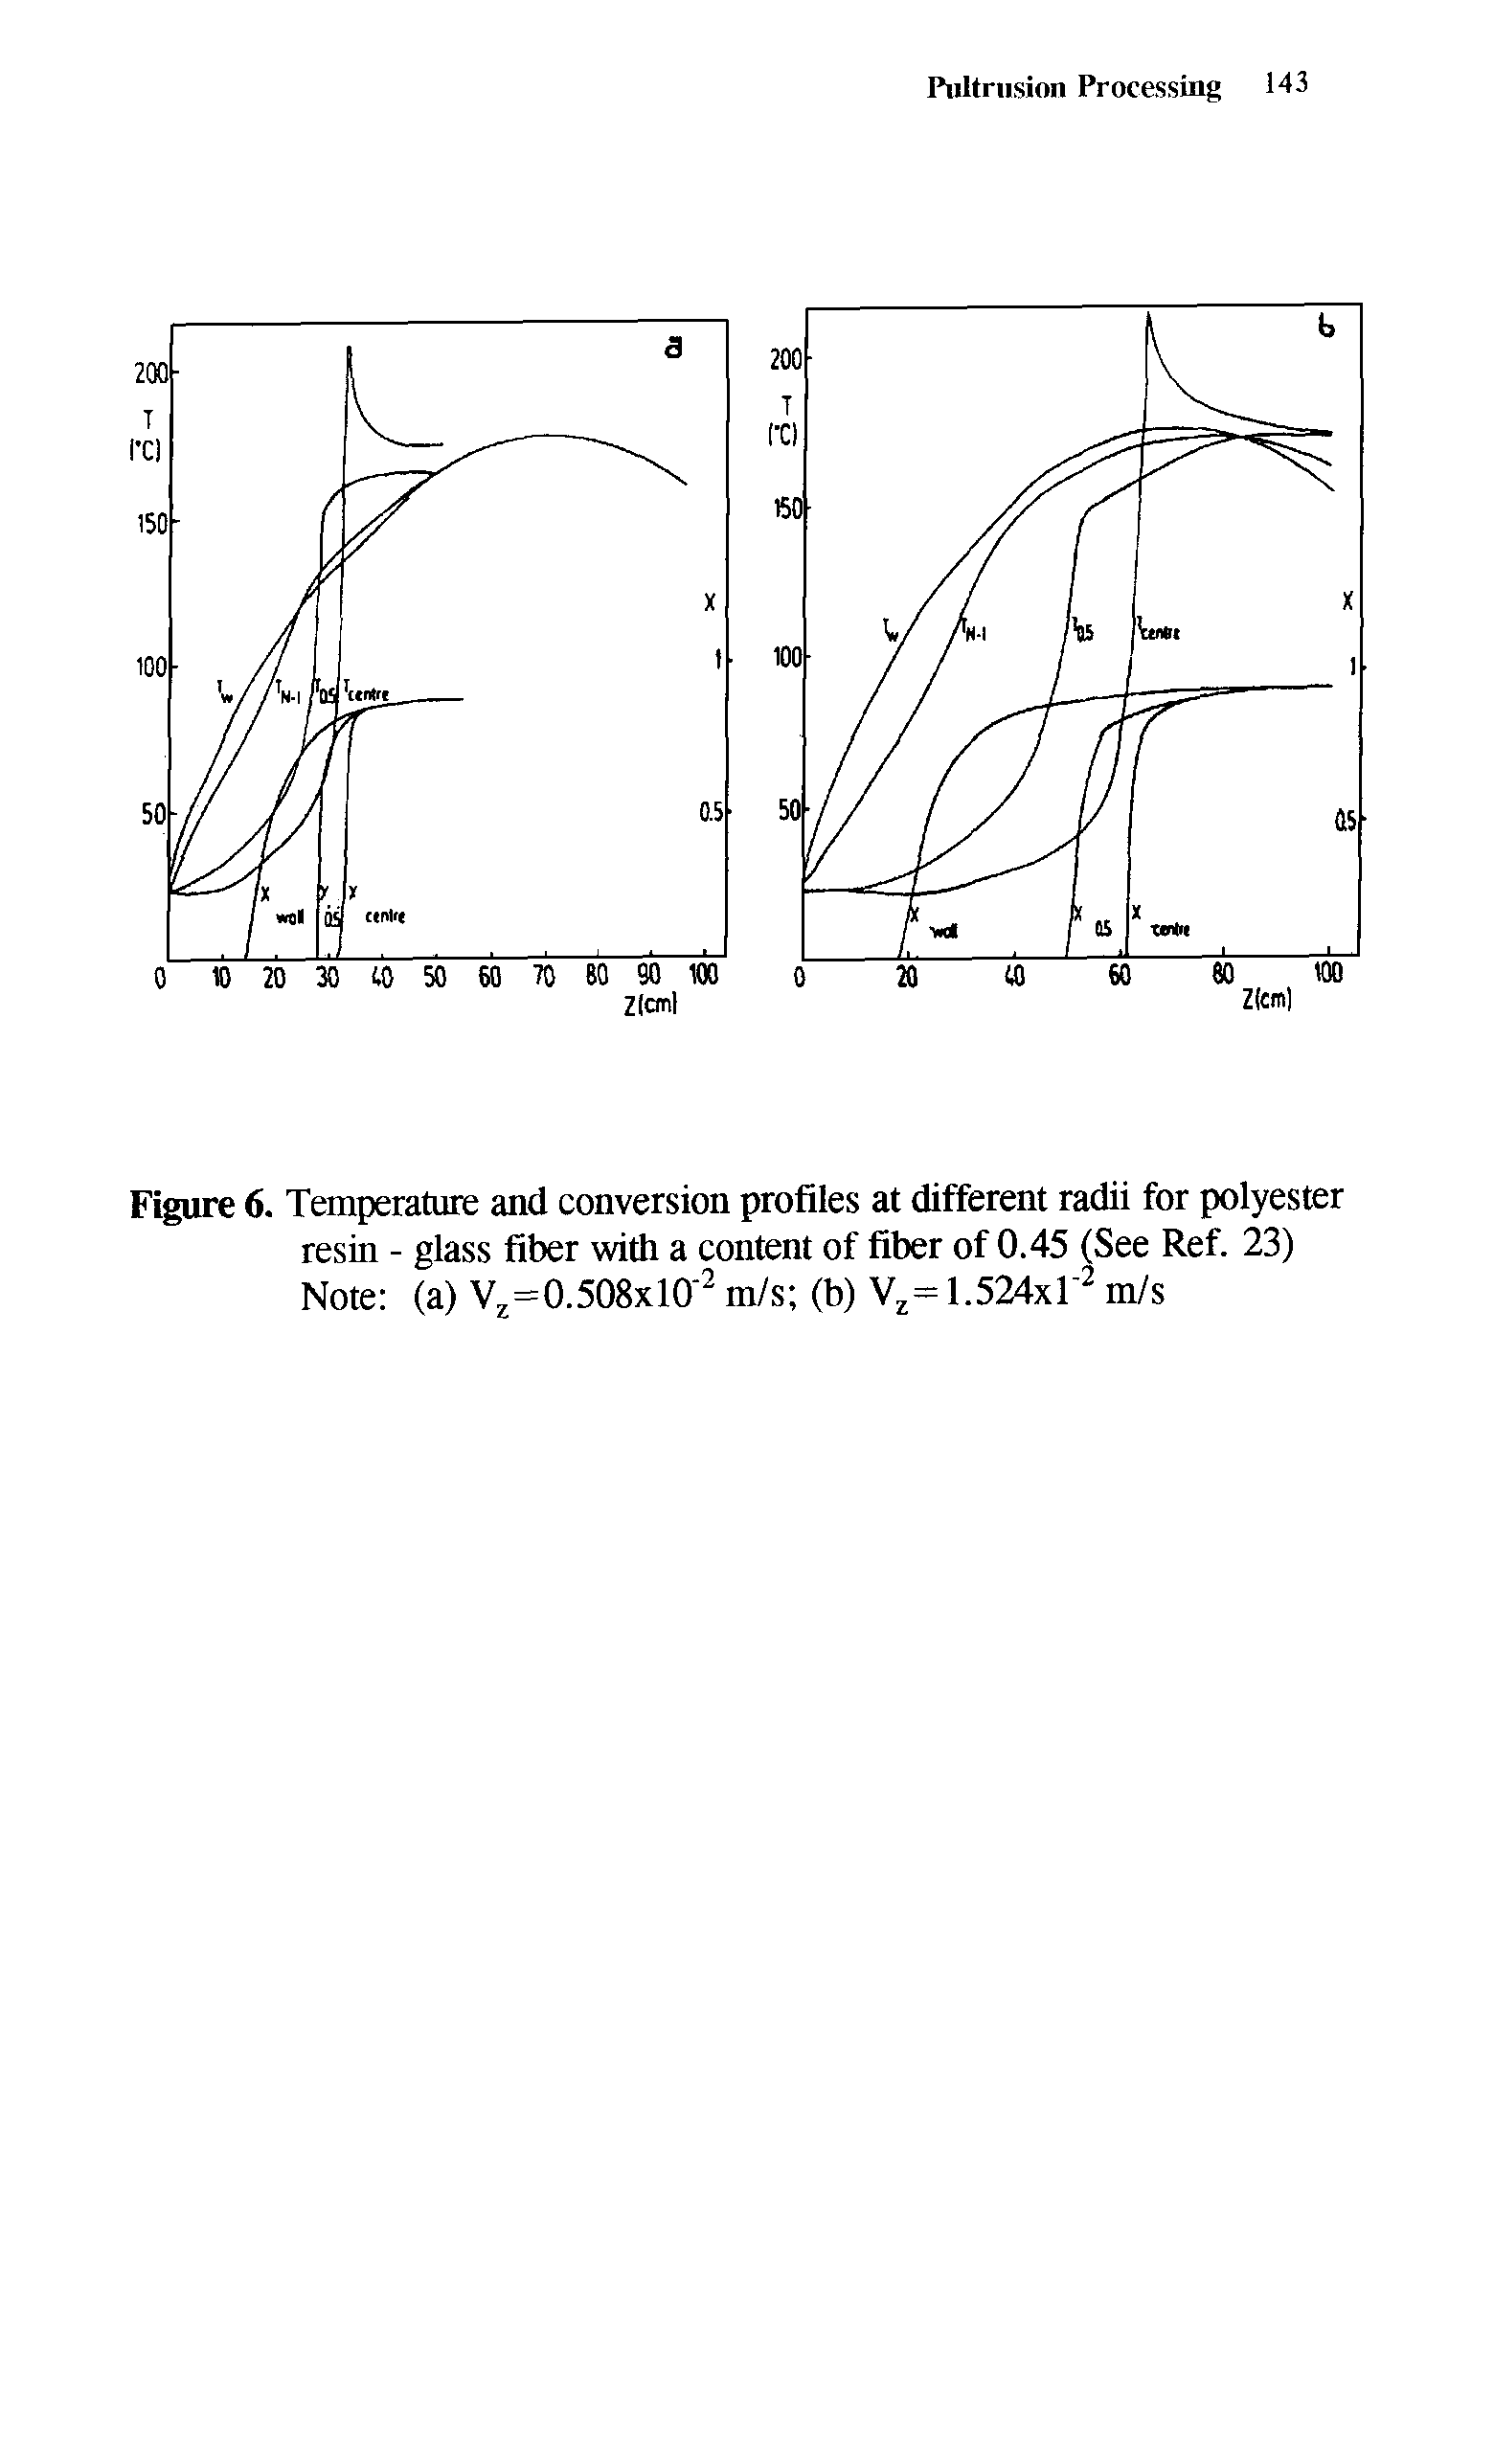 Figure 6. Temperature and conversion profiles at different radii for polyester resin - glass fiber with a content of fiber of 0.45 (See Ref. 23) Note (a) V,=0.508xl0 m/s (b) V,=1.524x1 m/s...